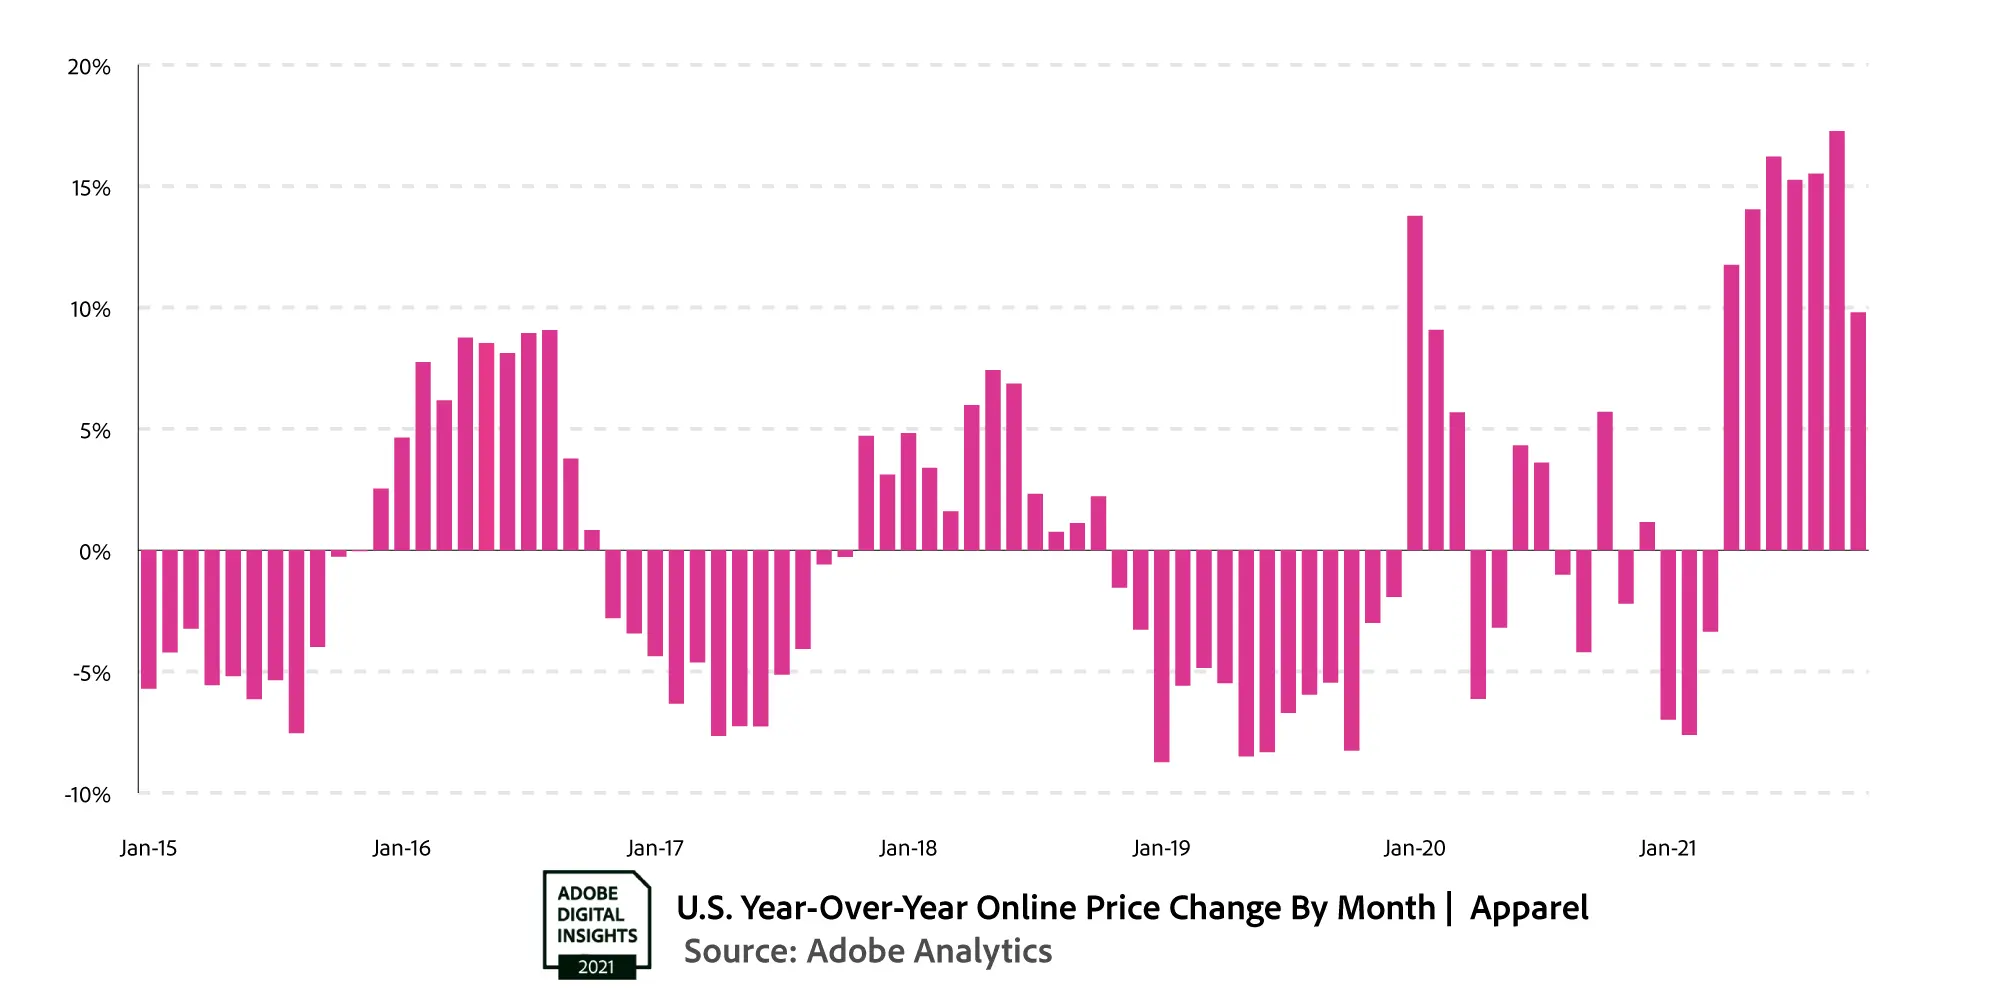 Adobe Digital Economy Index: YoY change in online prices for apparel. 